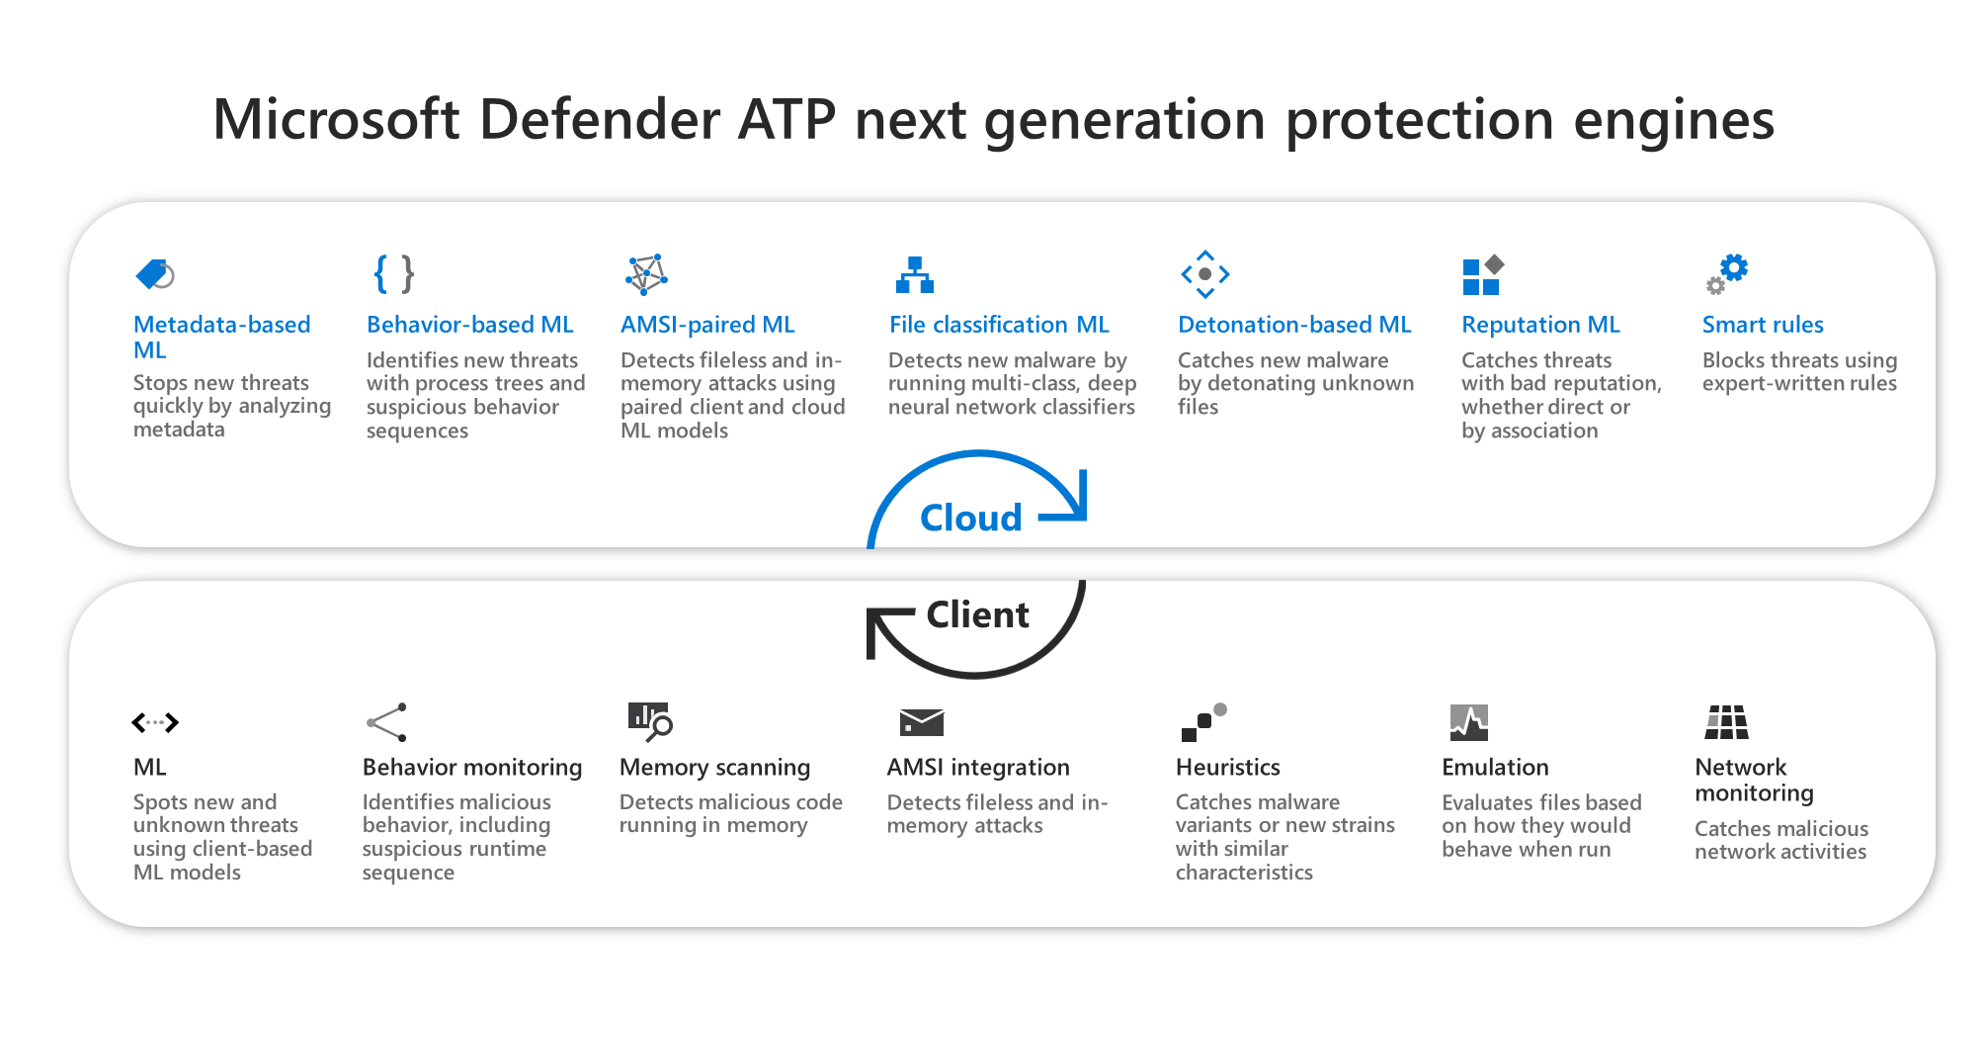 Inside out: Get to know the advanced technologies the core of Microsoft Defender ATP next generation protection | Microsoft Security Blog